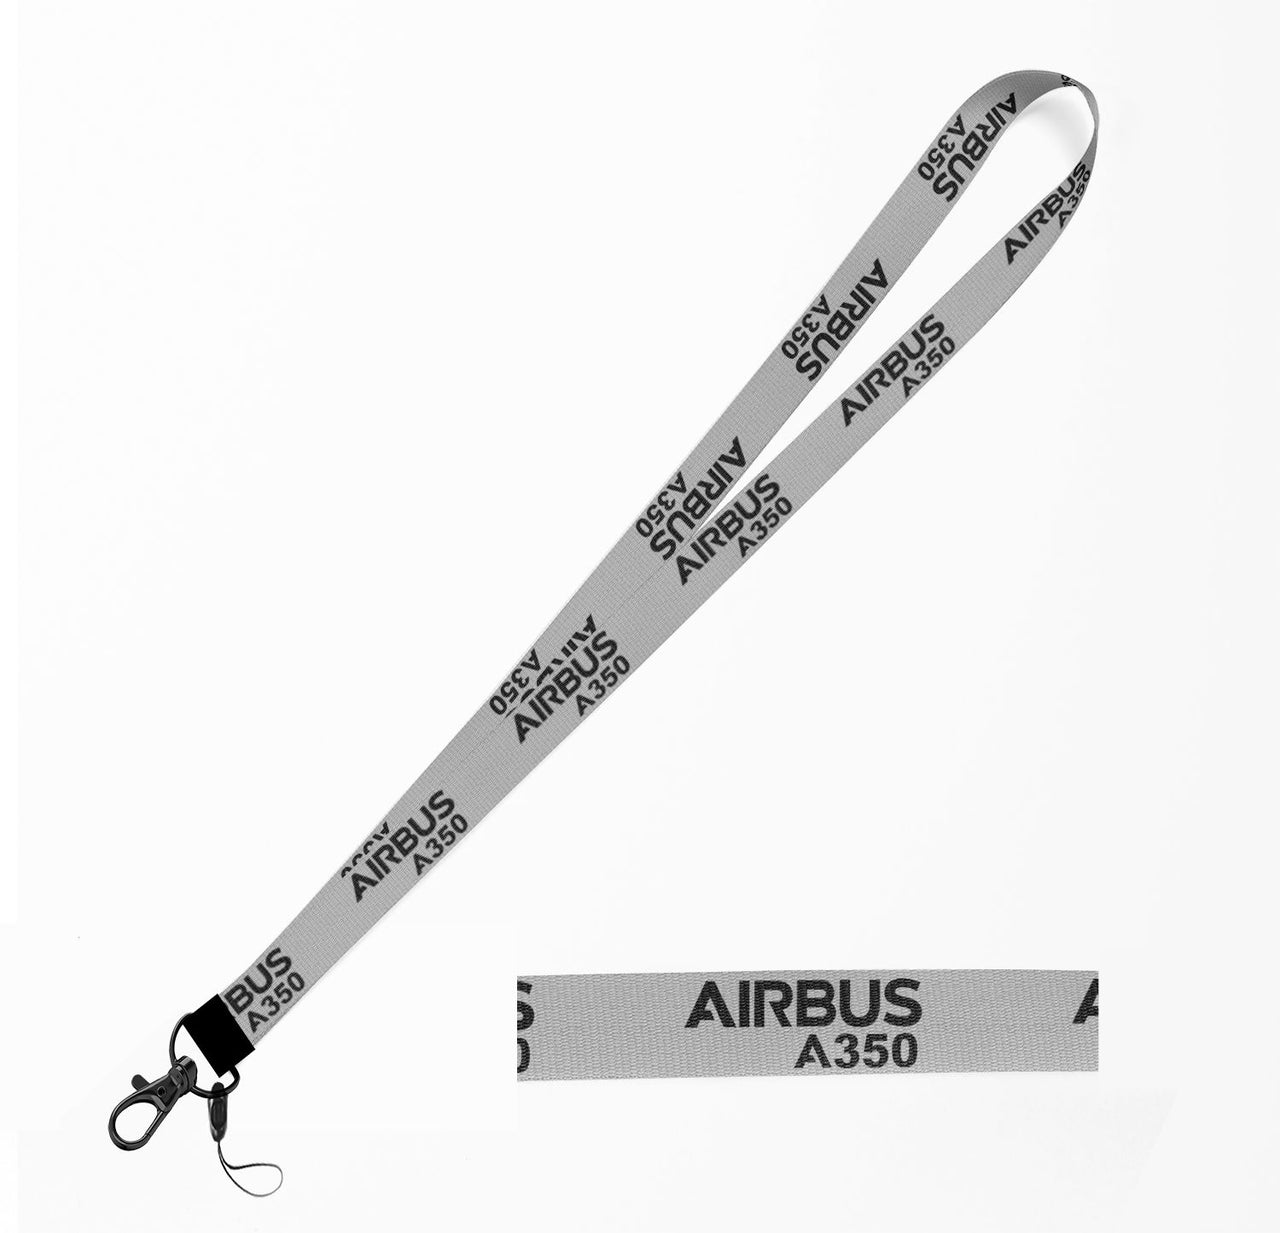 Airbus A350 & Text Designed Lanyard & ID Holders